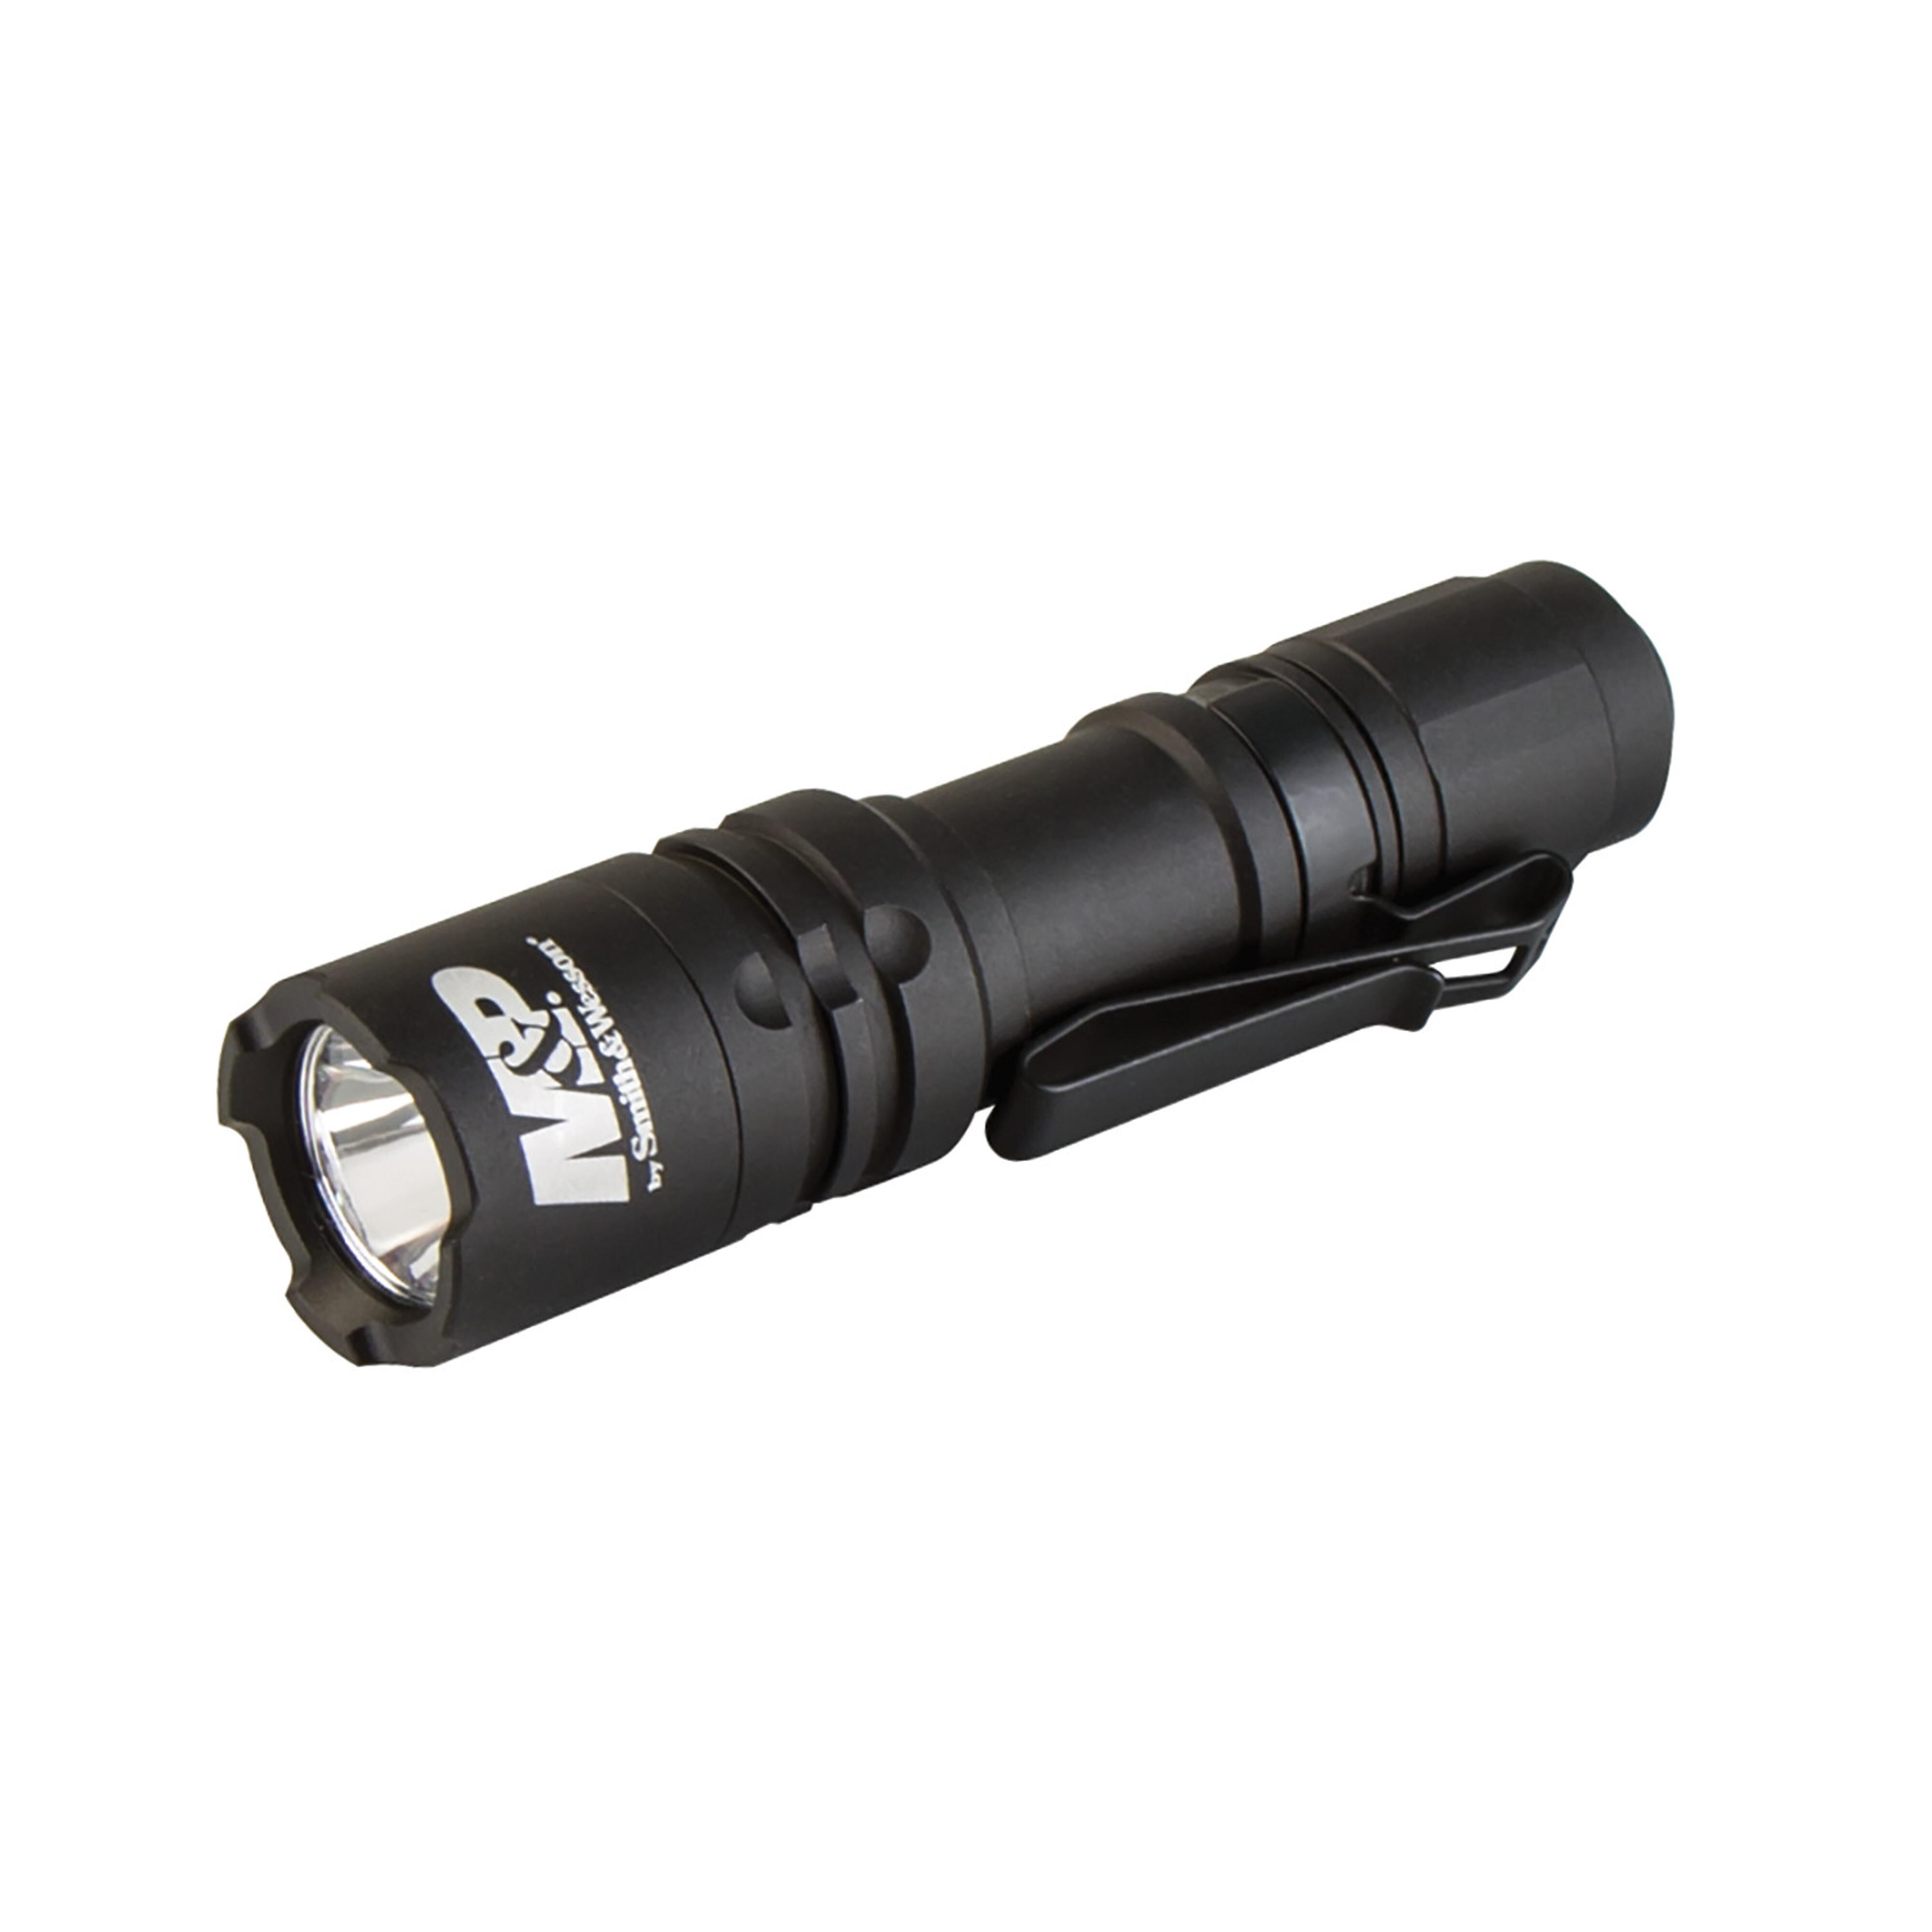 Smith & Wesson 110044 Delta Force Rm-20 Weapon Light Led With Remote Switch, 